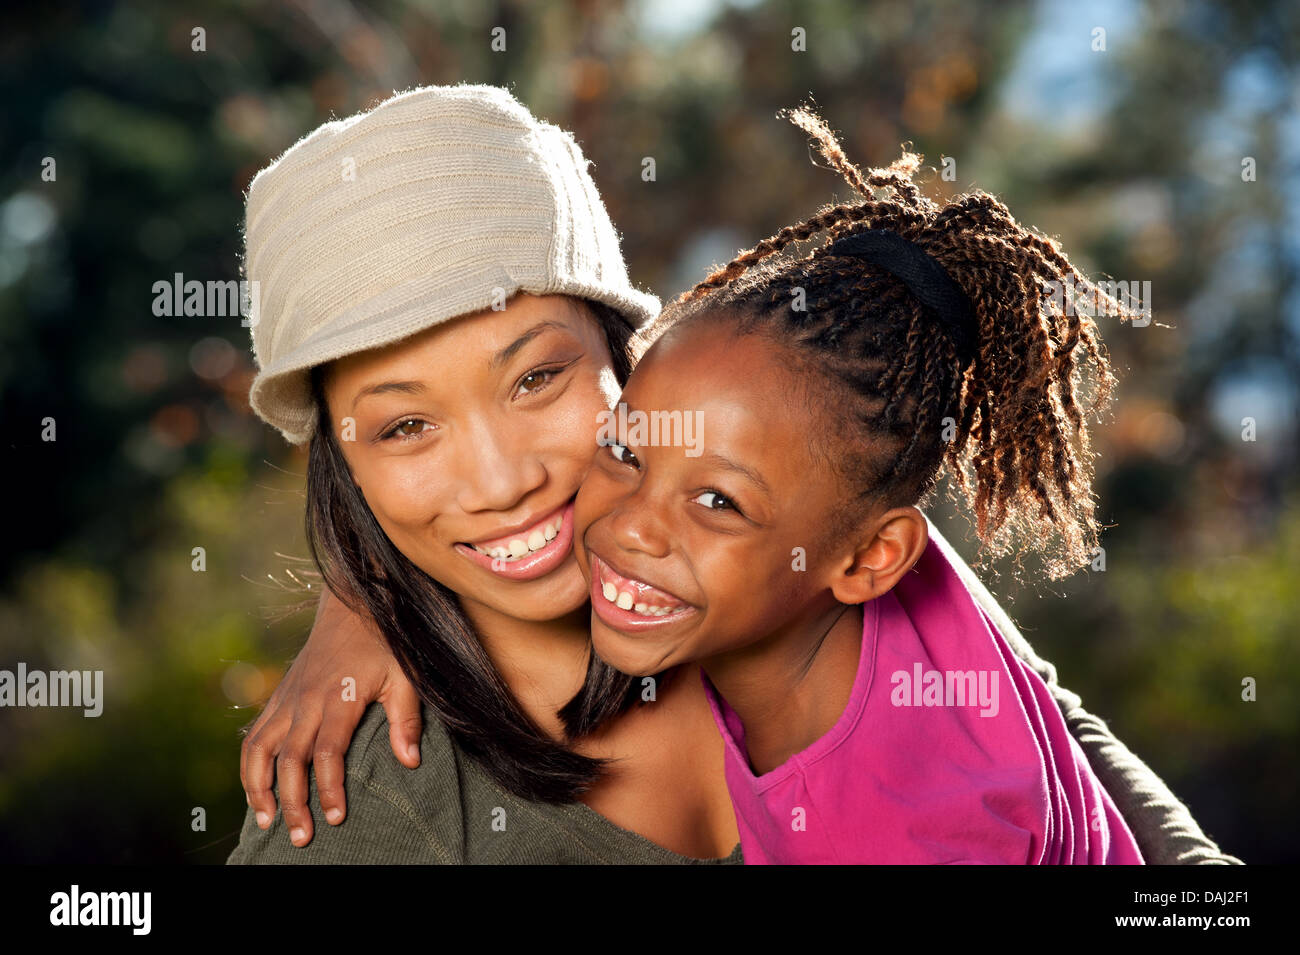 Young African American mother and daughter enjoying nice sunny day in a park. Stock Photo